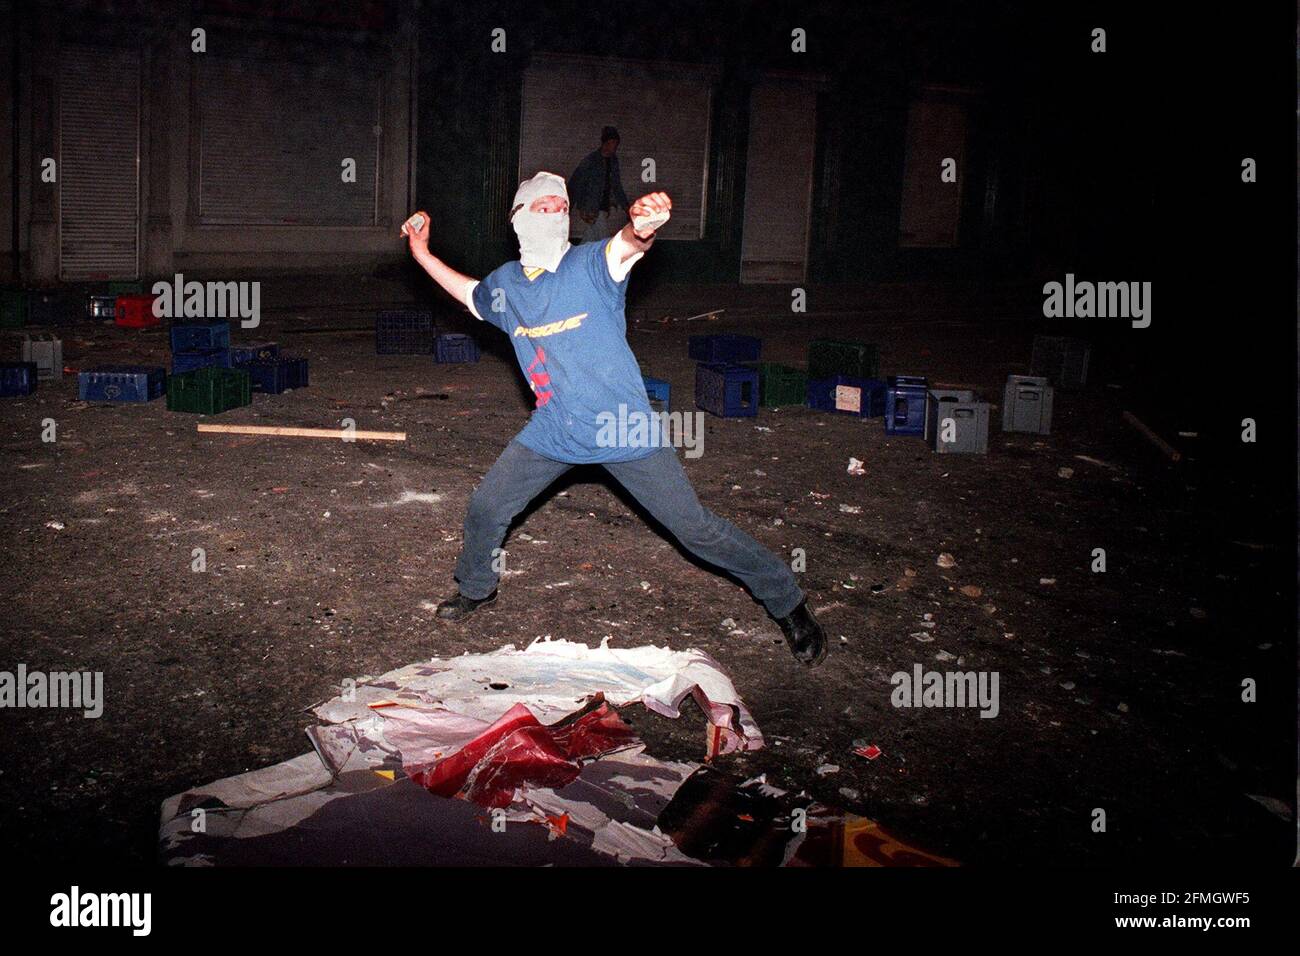 NATIONALIST YOUTH THEROWING STONES AT THE RUC IN LONDONDERRY DURING THE NIGHT AFTER LOYALIST MARCHES THE TROUBLE WAS HOWEVER ON A MUCH SMALLER SCALE THAN PREDICTED 10 8 96. PHOTO TOM PILSTON. Stock Photo